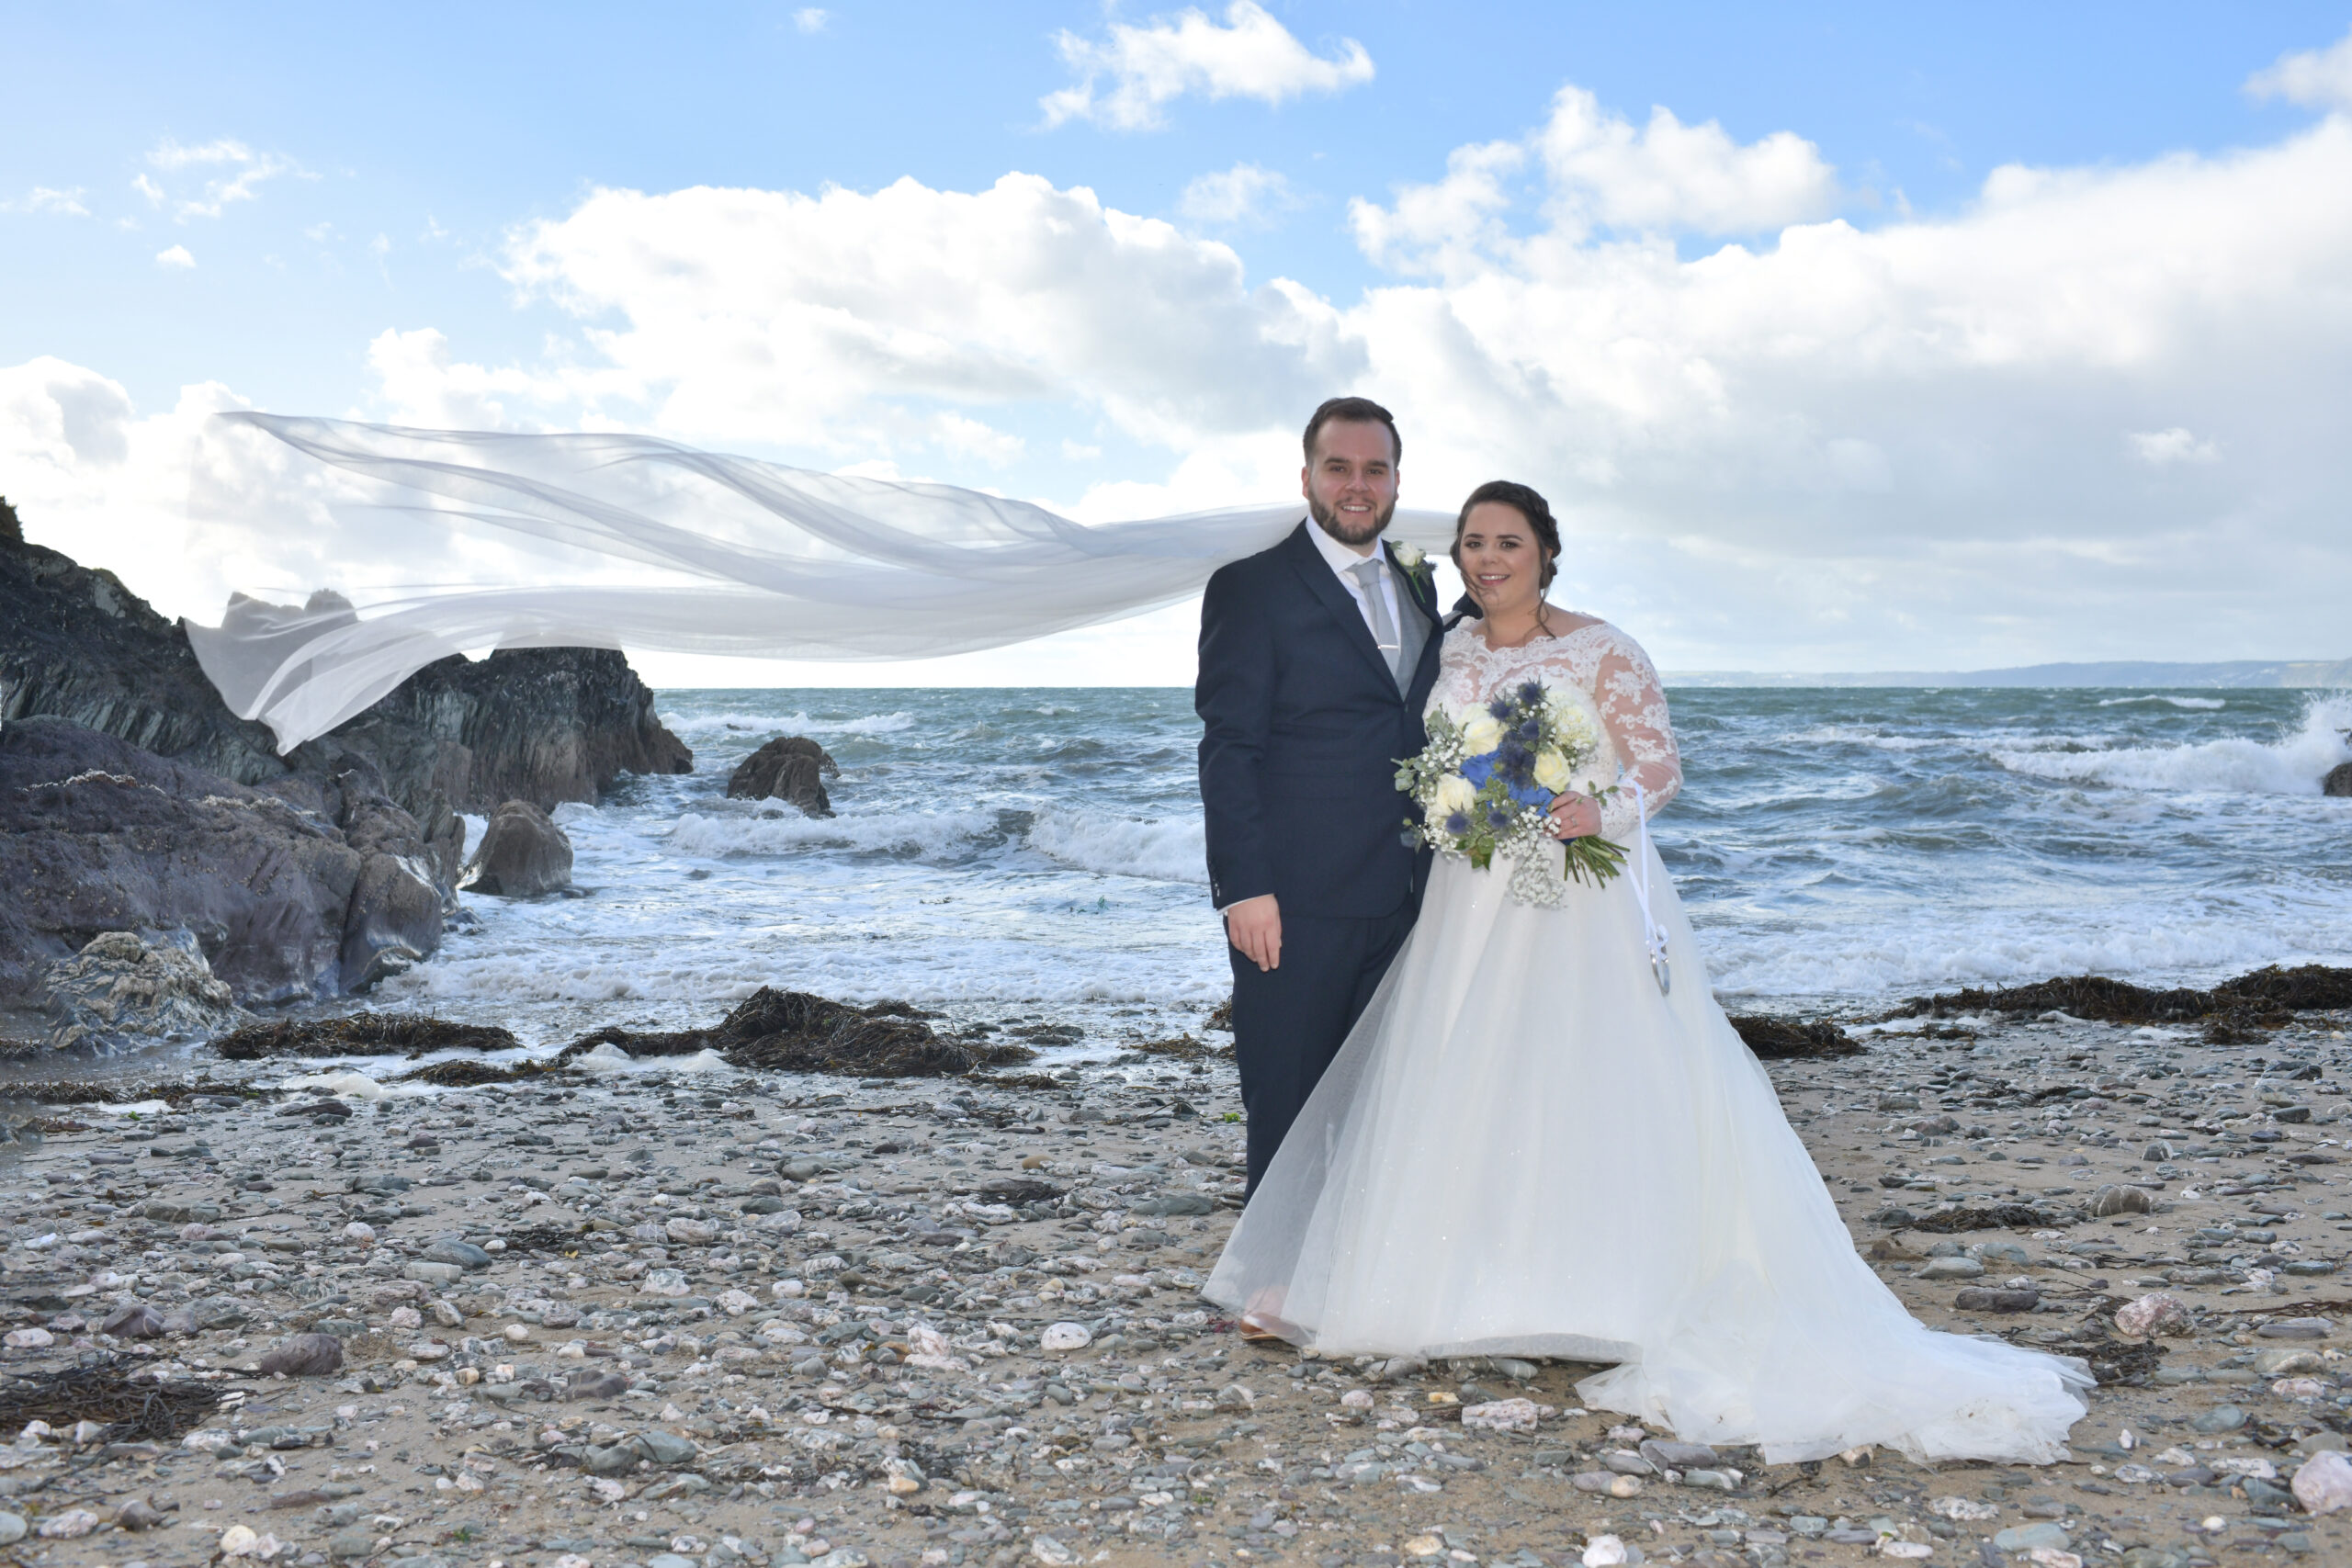 Wedding Photography on the Beach at Polhawn Fort